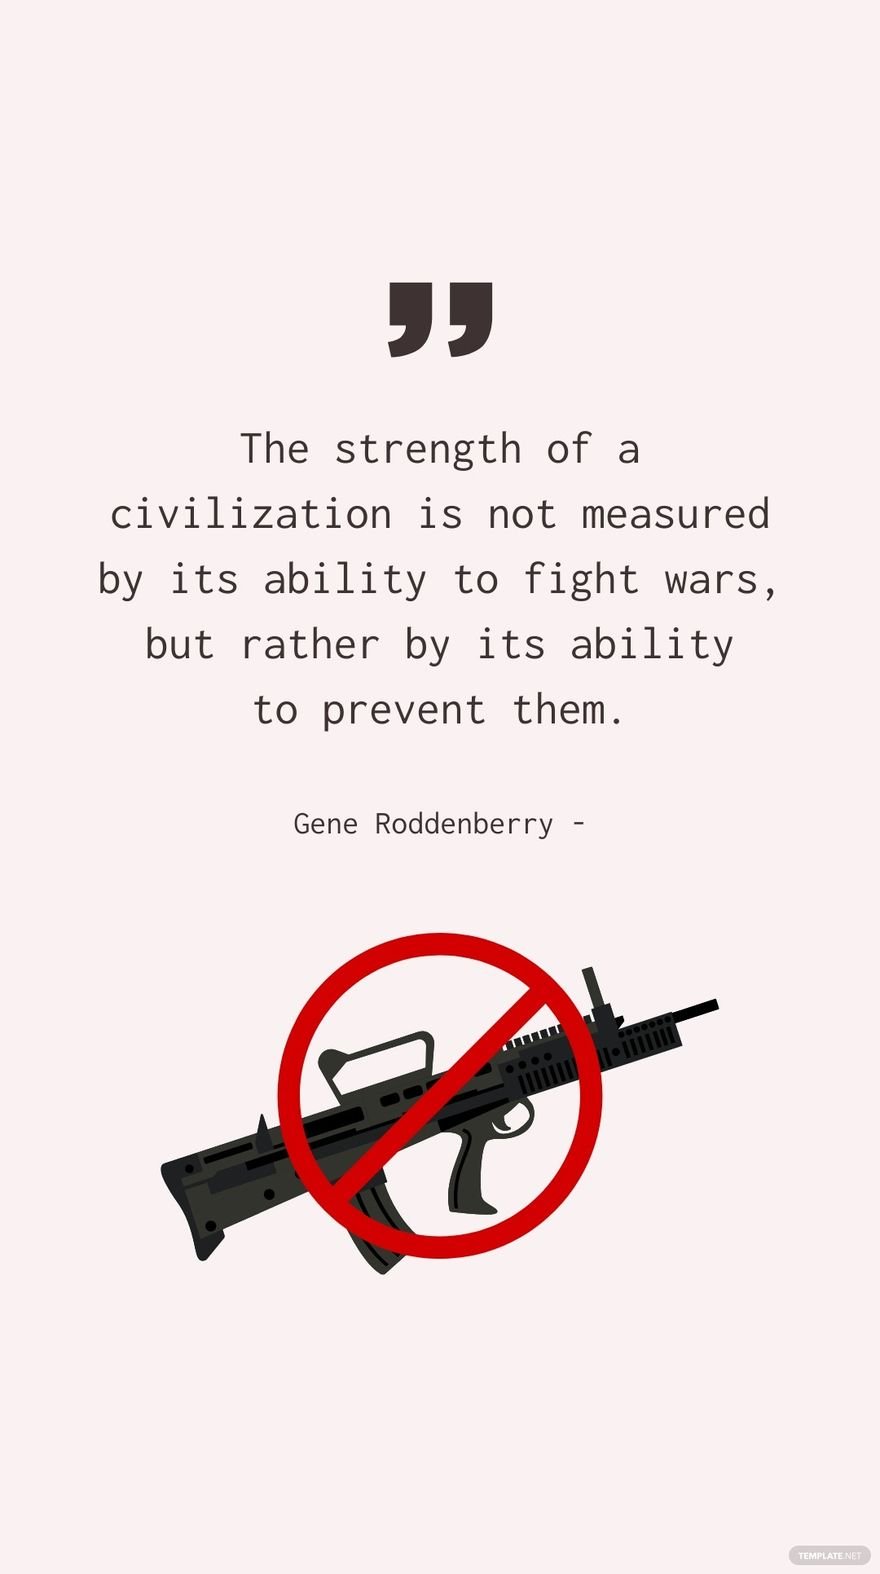 Gene Roddenberry - The strength of a civilization is not measured by its ability to fight wars, but rather by its ability to prevent them.